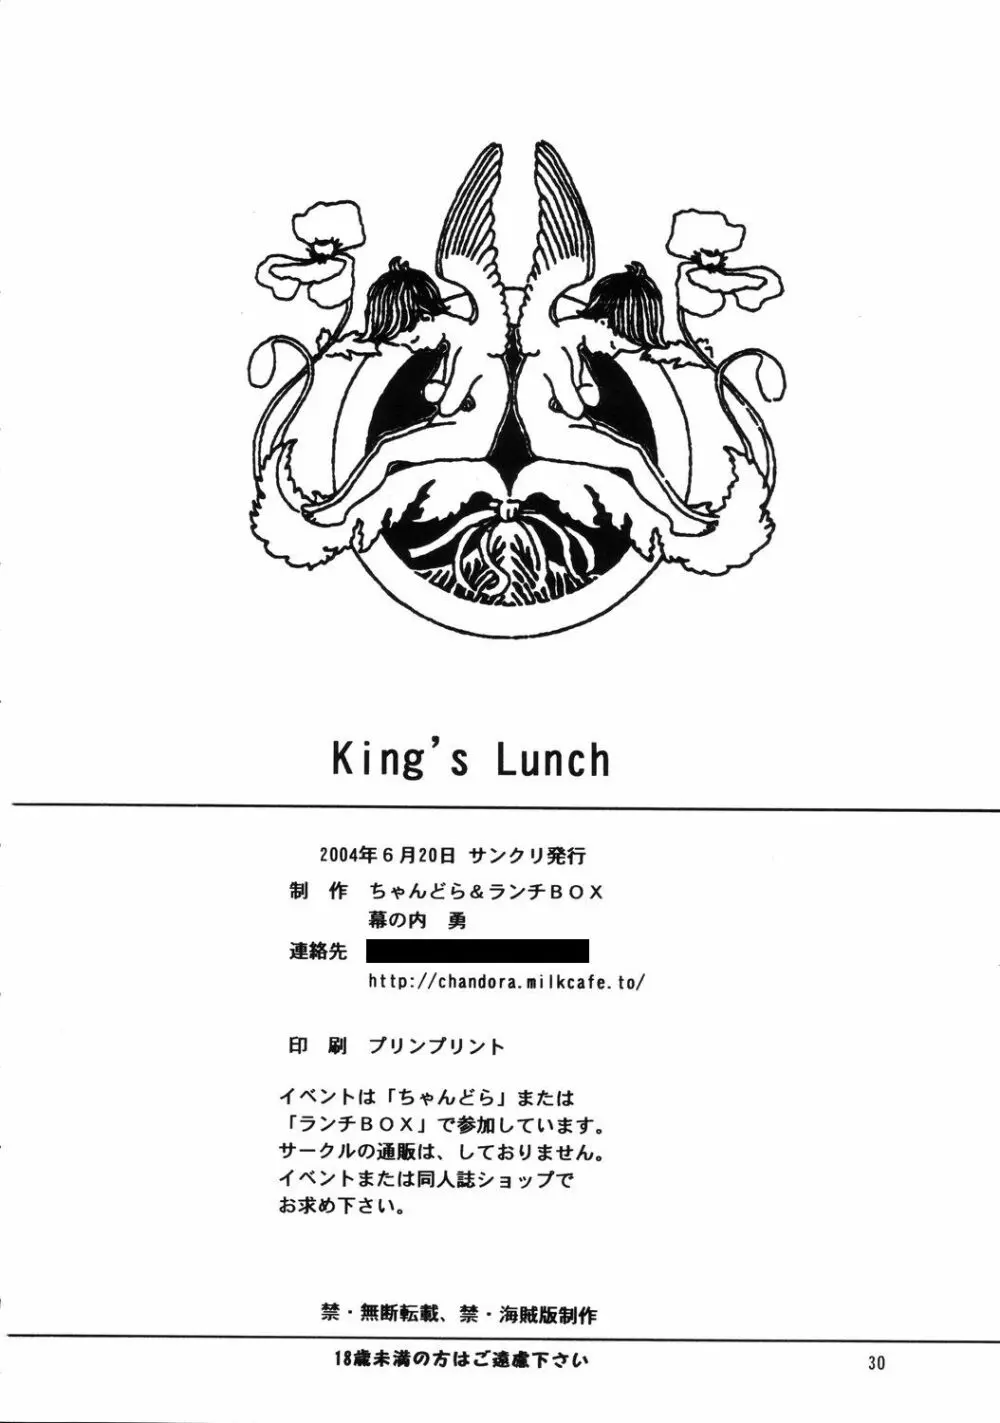 Lunch Box 62 – King’s Lunch 29ページ